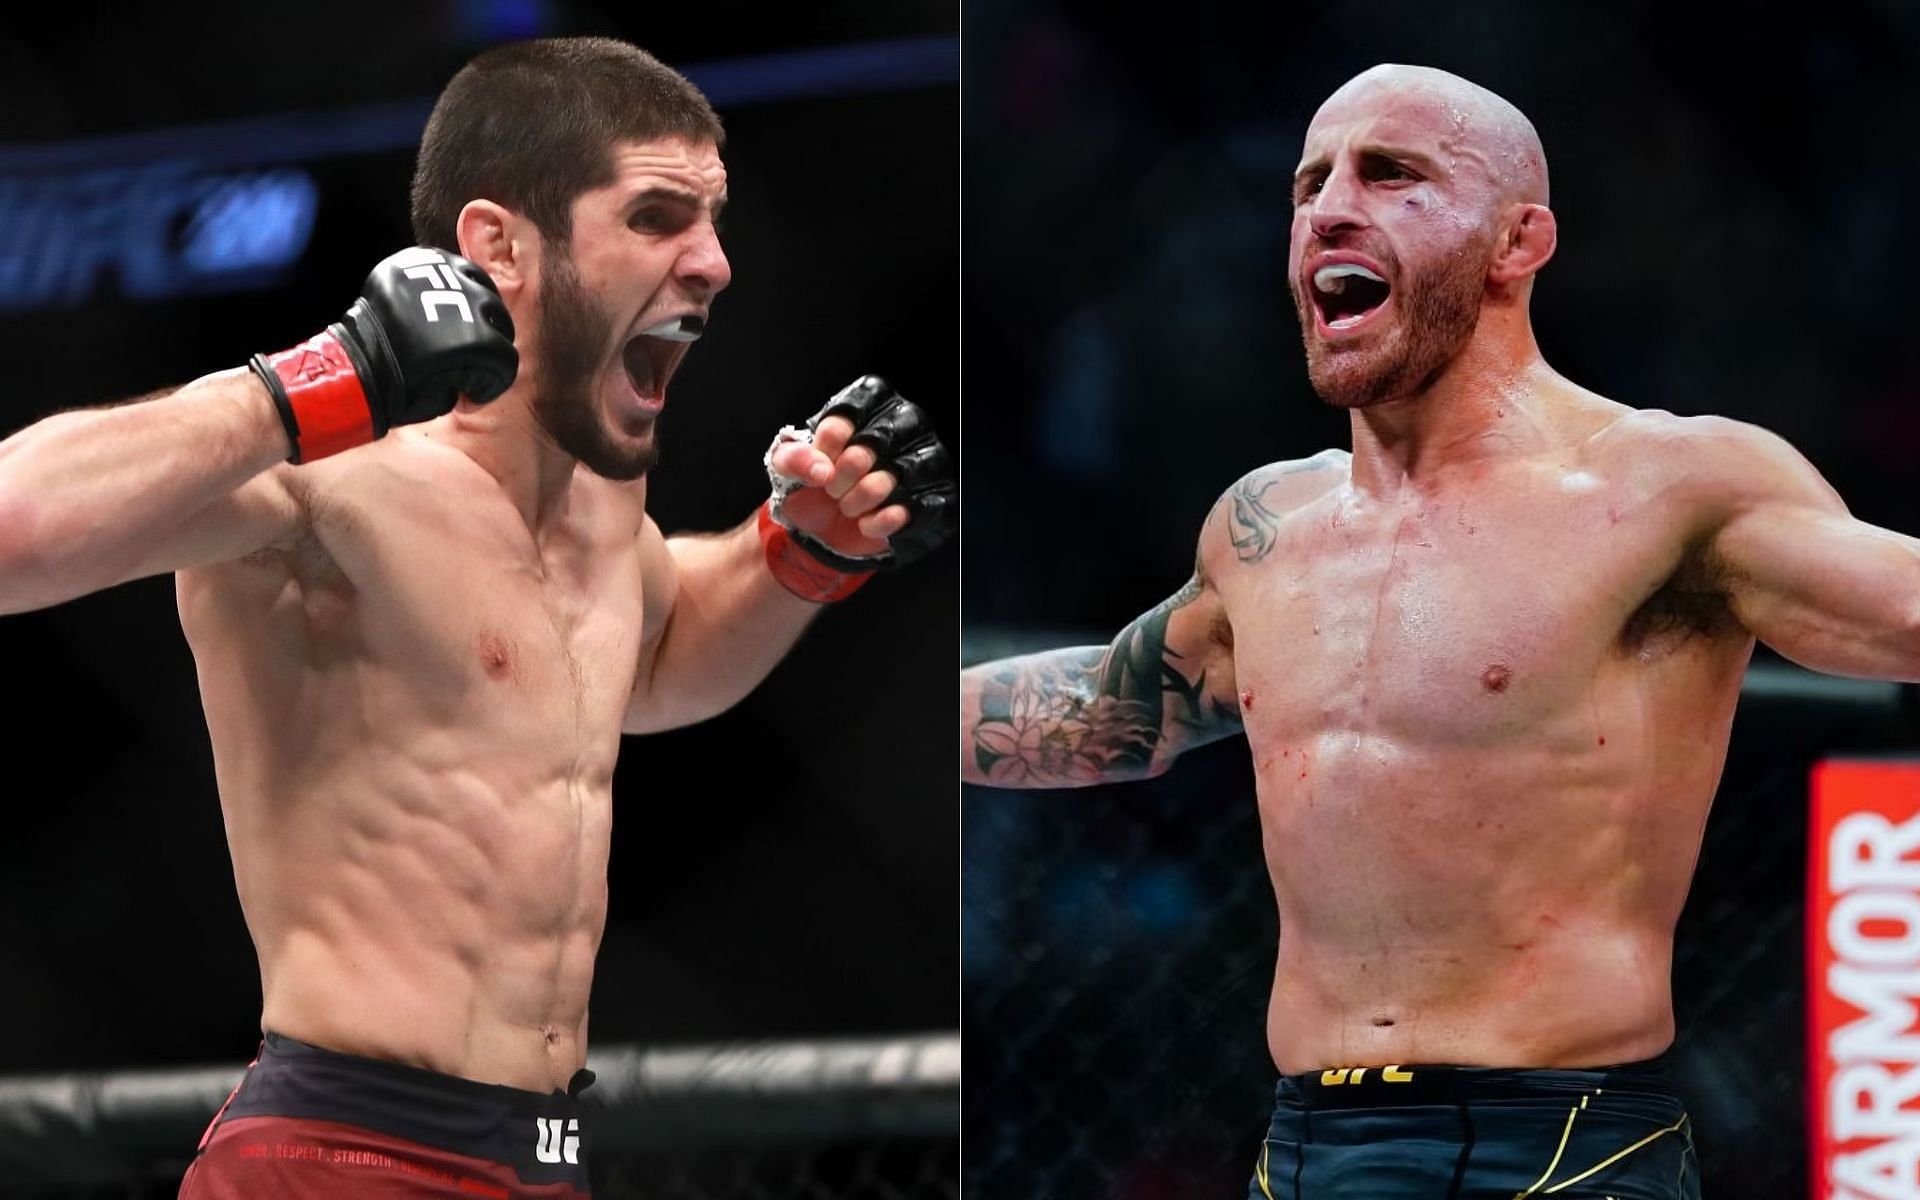 Islam Makhachev is set to face Alexander Volkanovski in a huge bout this weekend